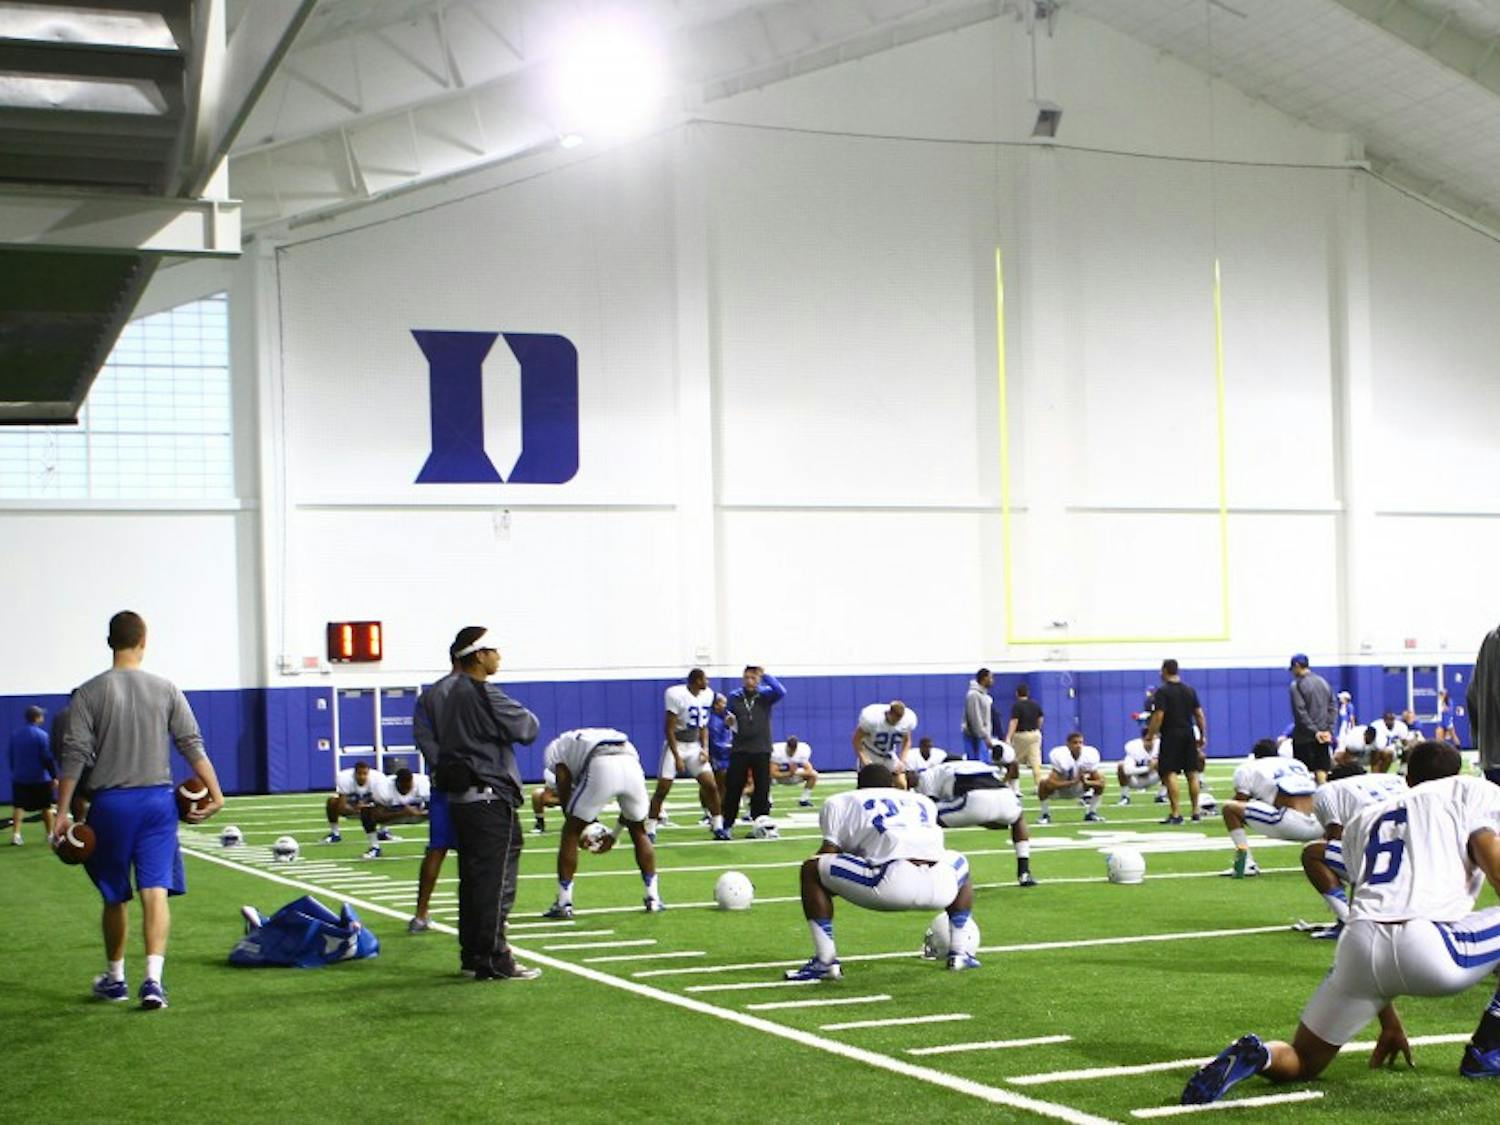 Duke made wholesale upgrades to its practice facilities with the opening of the Pascal Field House in 2011.